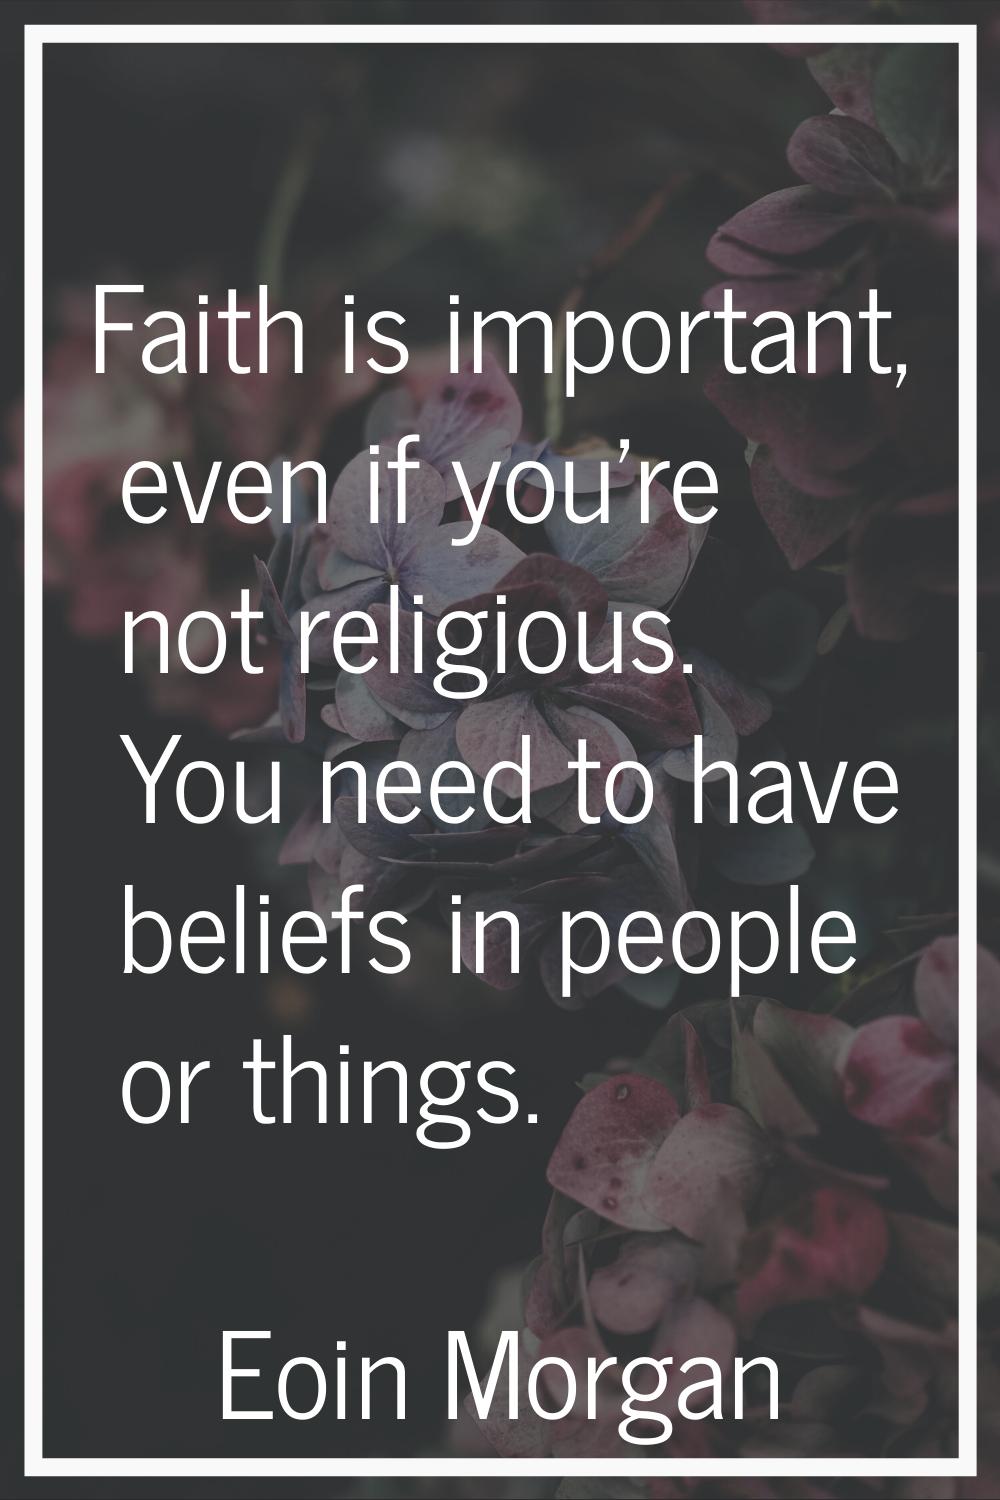 Faith is important, even if you're not religious. You need to have beliefs in people or things.